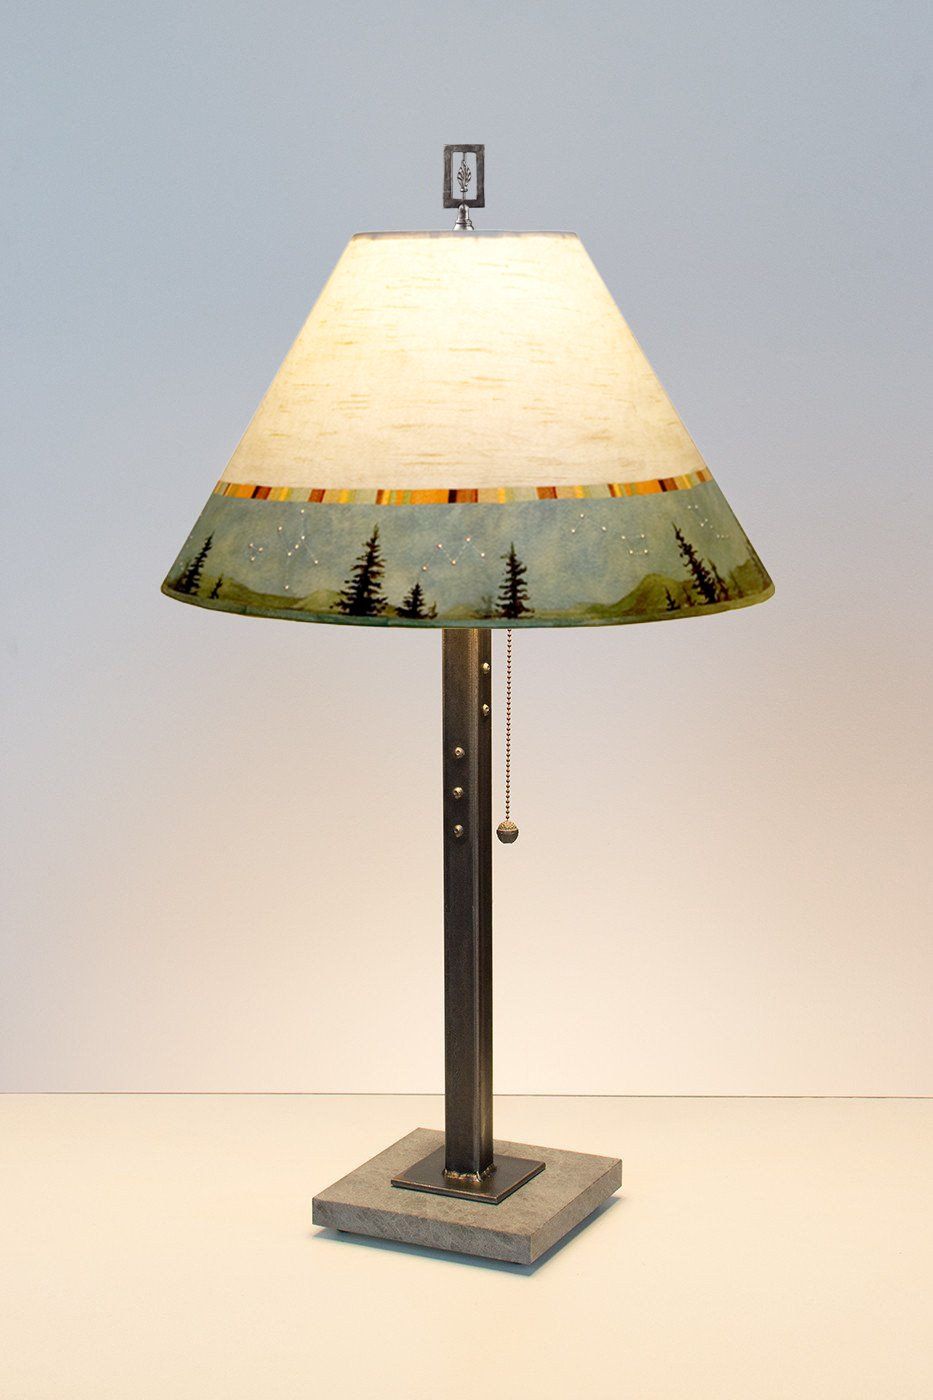 Janna Ugone & Co Table Lamps Steel Table Lamp with Medium Conical Shade in Birch Midnight